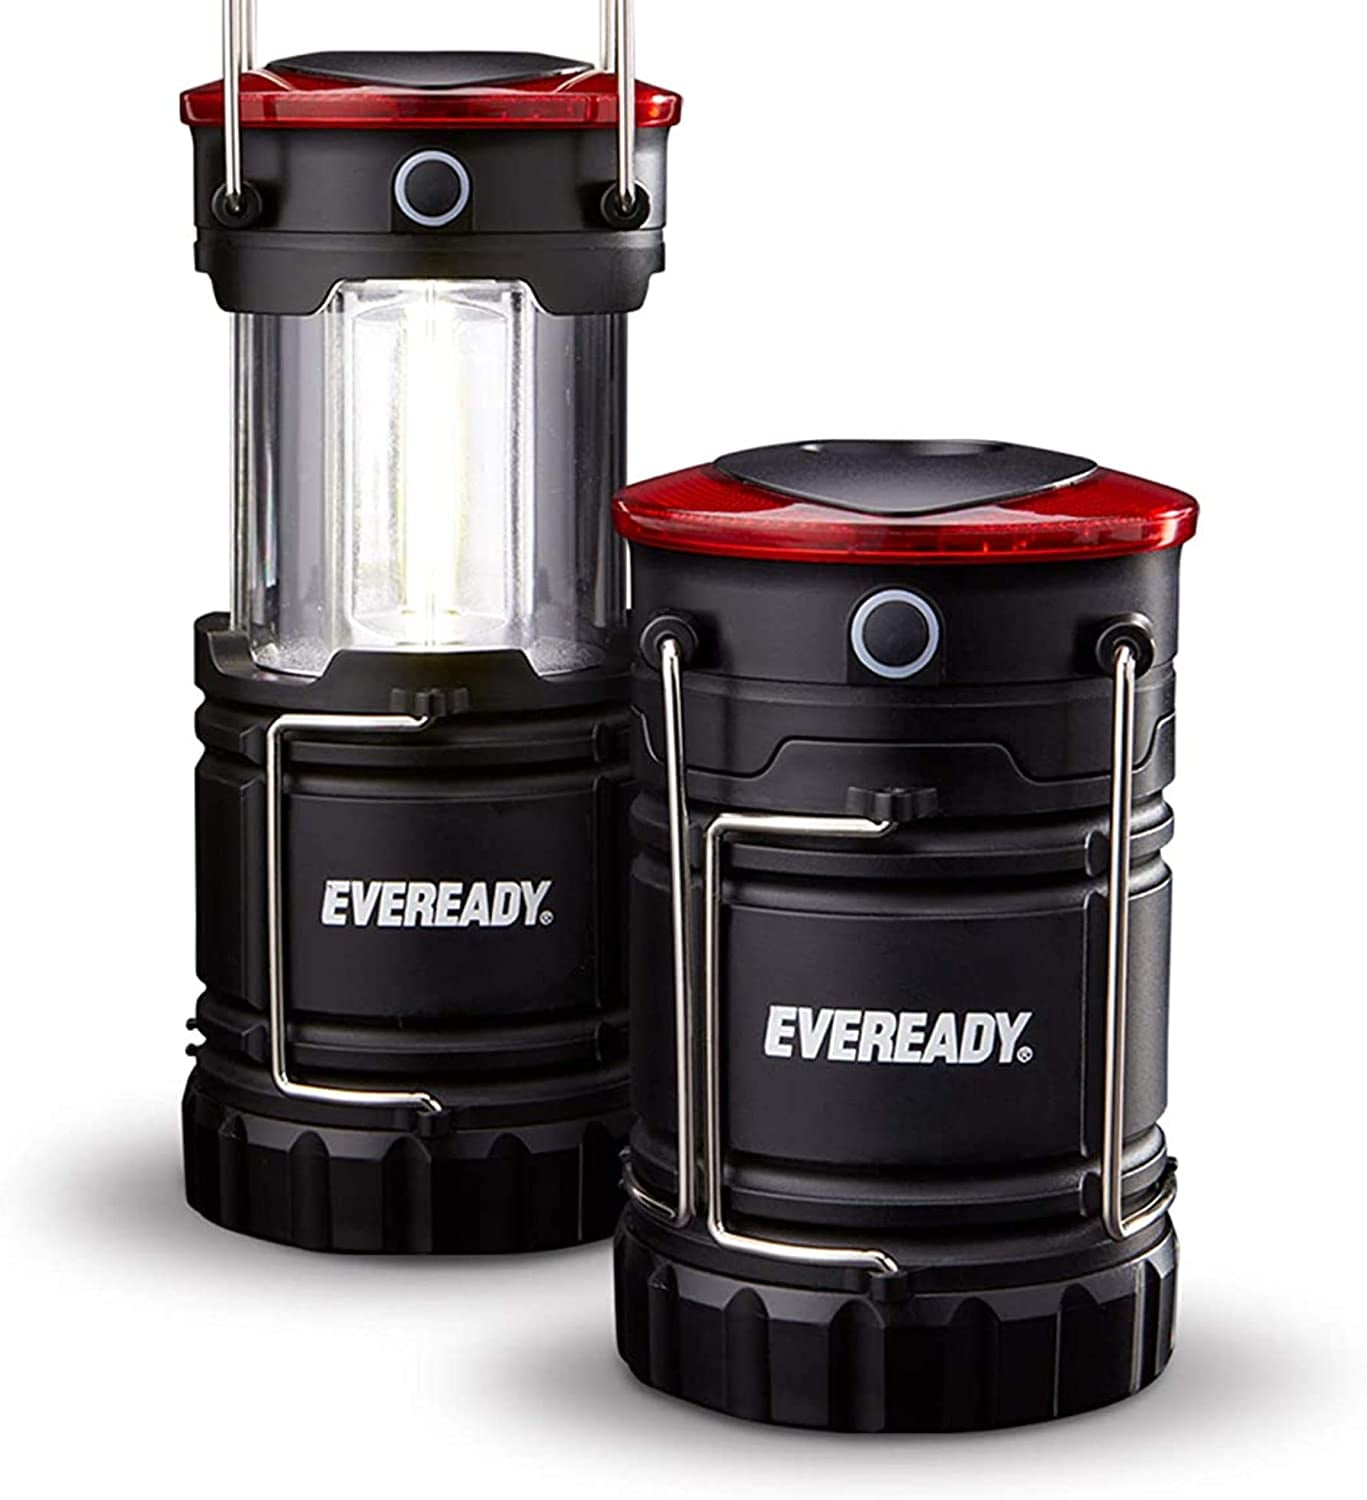  Eveready LED Camping Lanterns (4-Pack), Hybrid Power  Rechargeable Collapsible Lantern Flashlights, Ultra Bright Tent Lights for  Outdoors, Camping, Fishing, Emergency Black , one Size : Sports & Outdoors